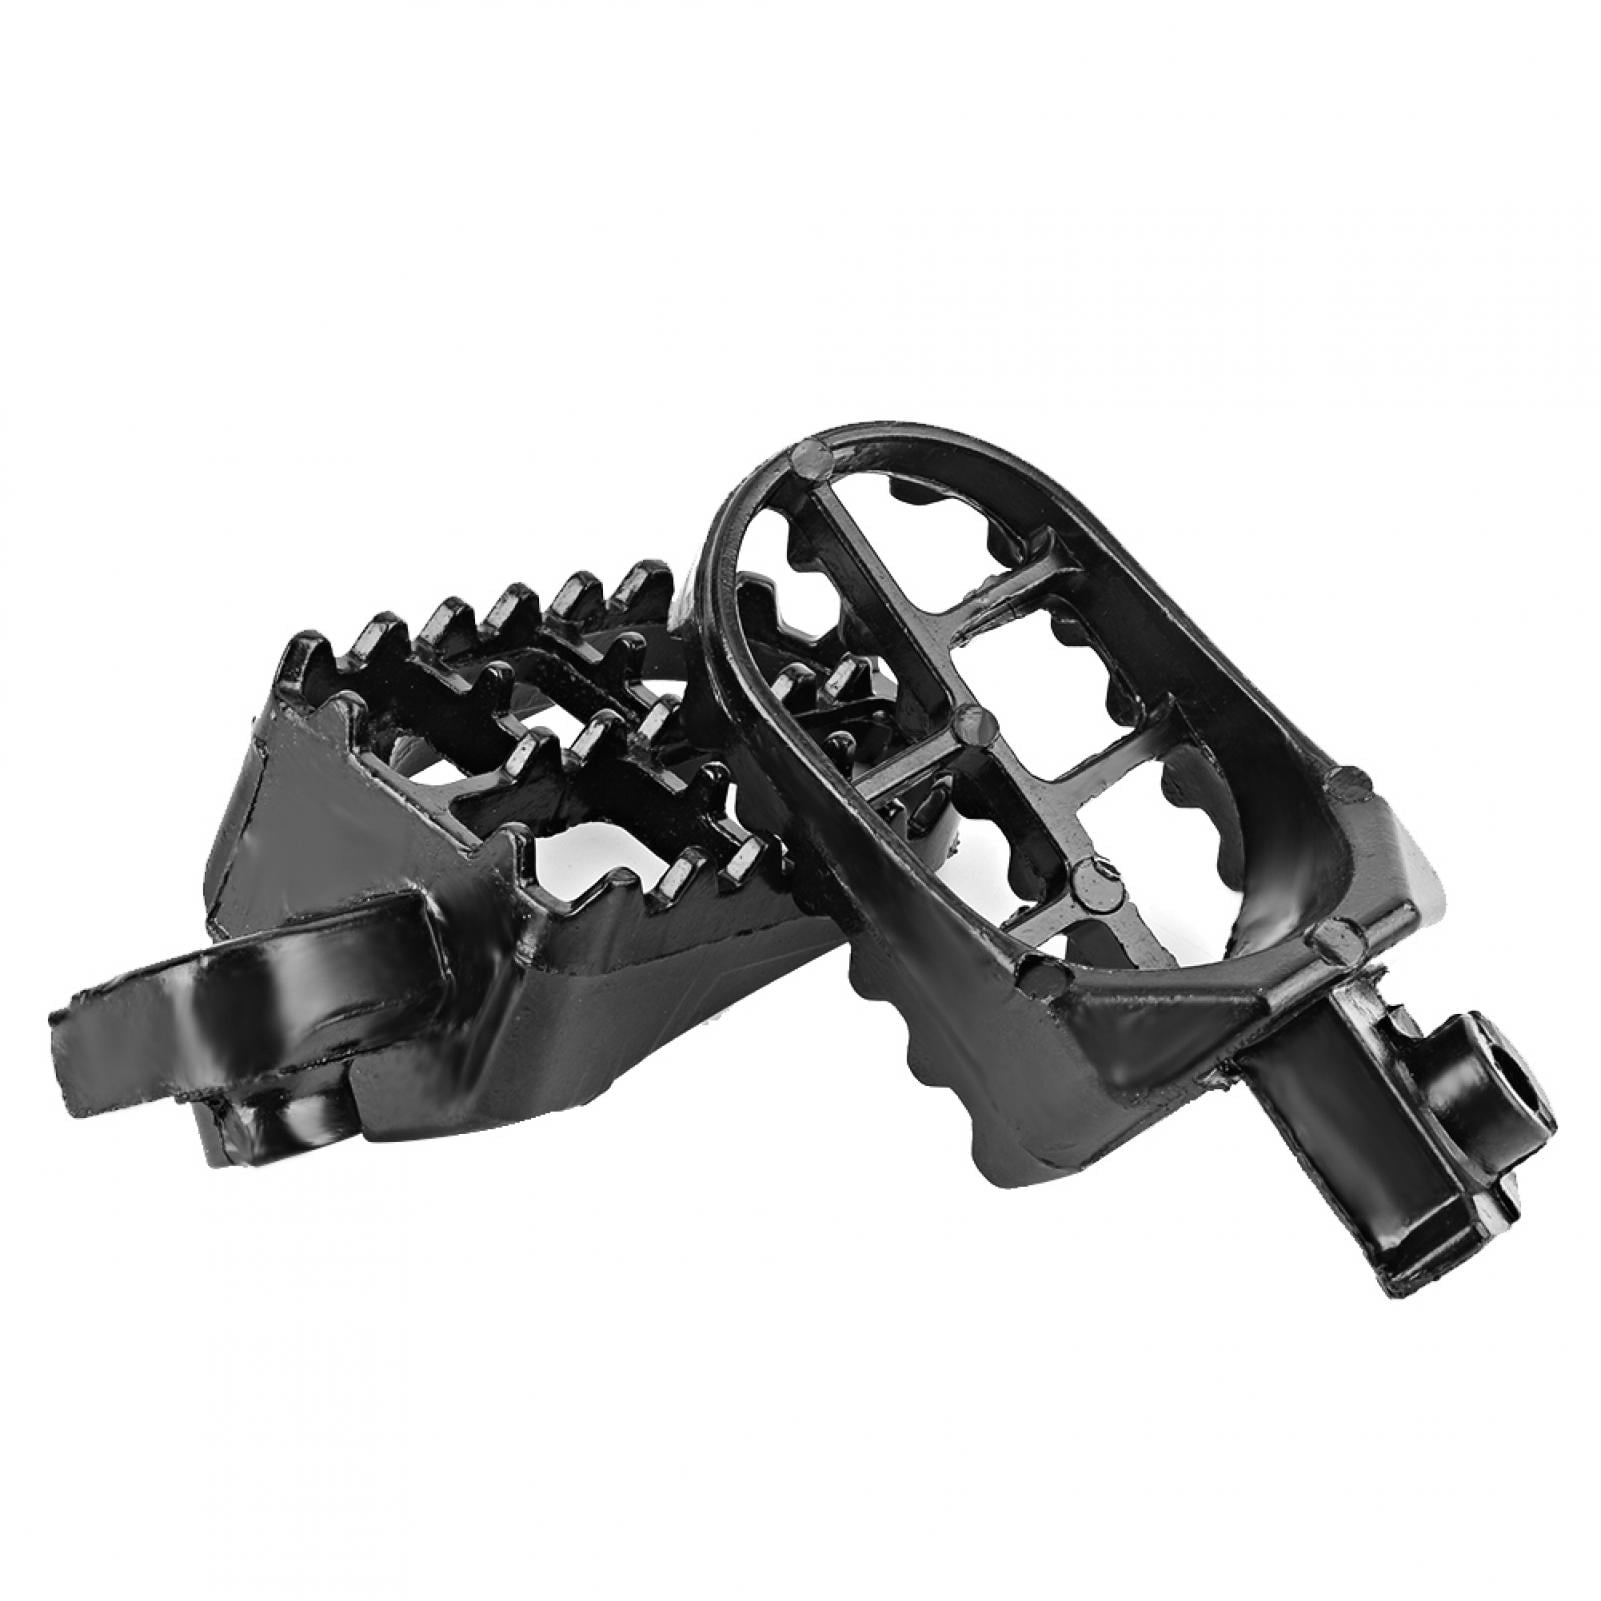 Footrest Footpegs Assembly for CRF50 CRF70 CRF80 CRF100 CRF150 CRF Dirt Bike 